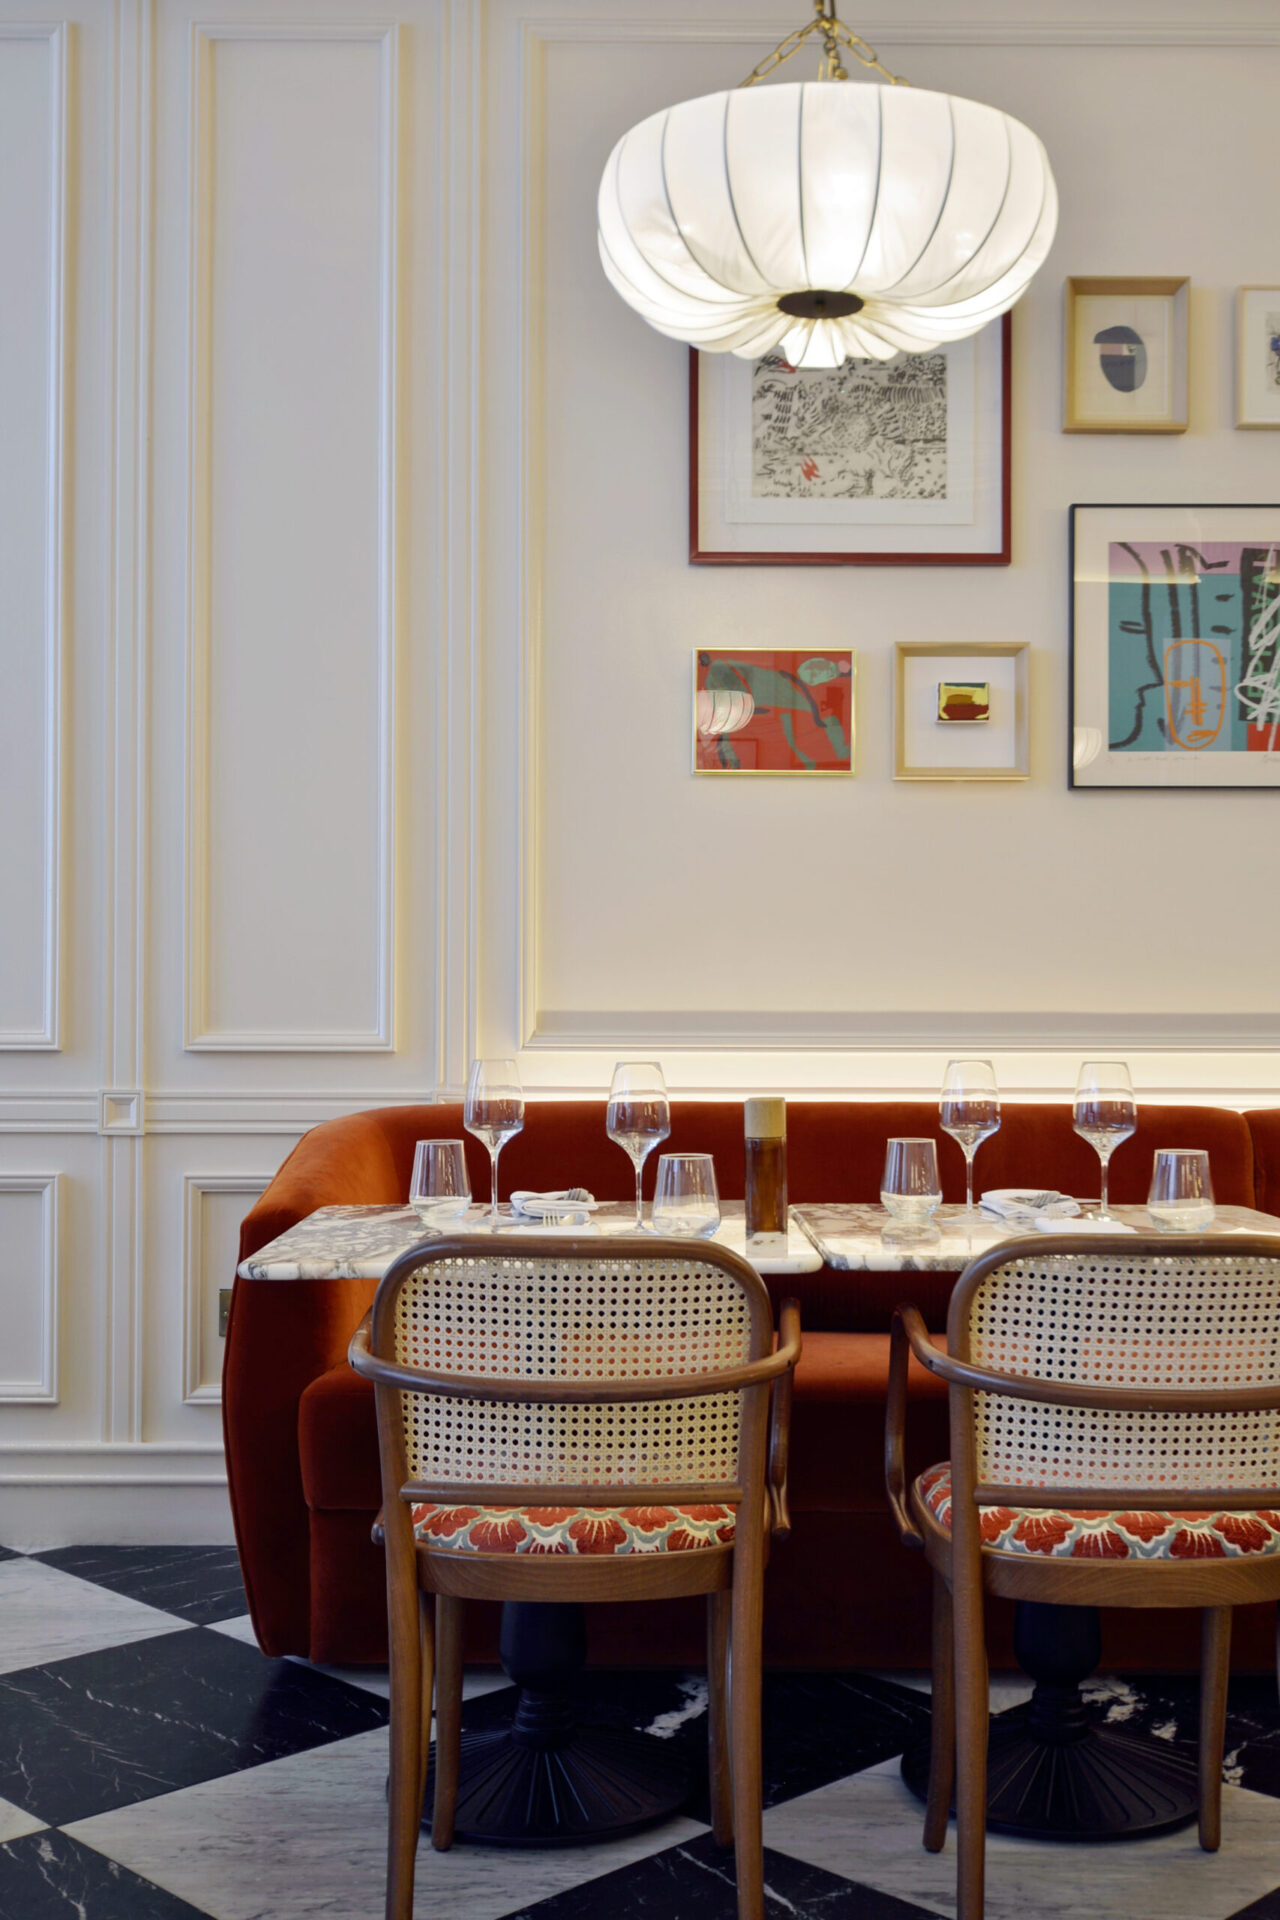 Elengant interior Banquette seating and paintings at Le Petit BeefBar Restaurant Edinburgh inside Hotel Intercontinental the George